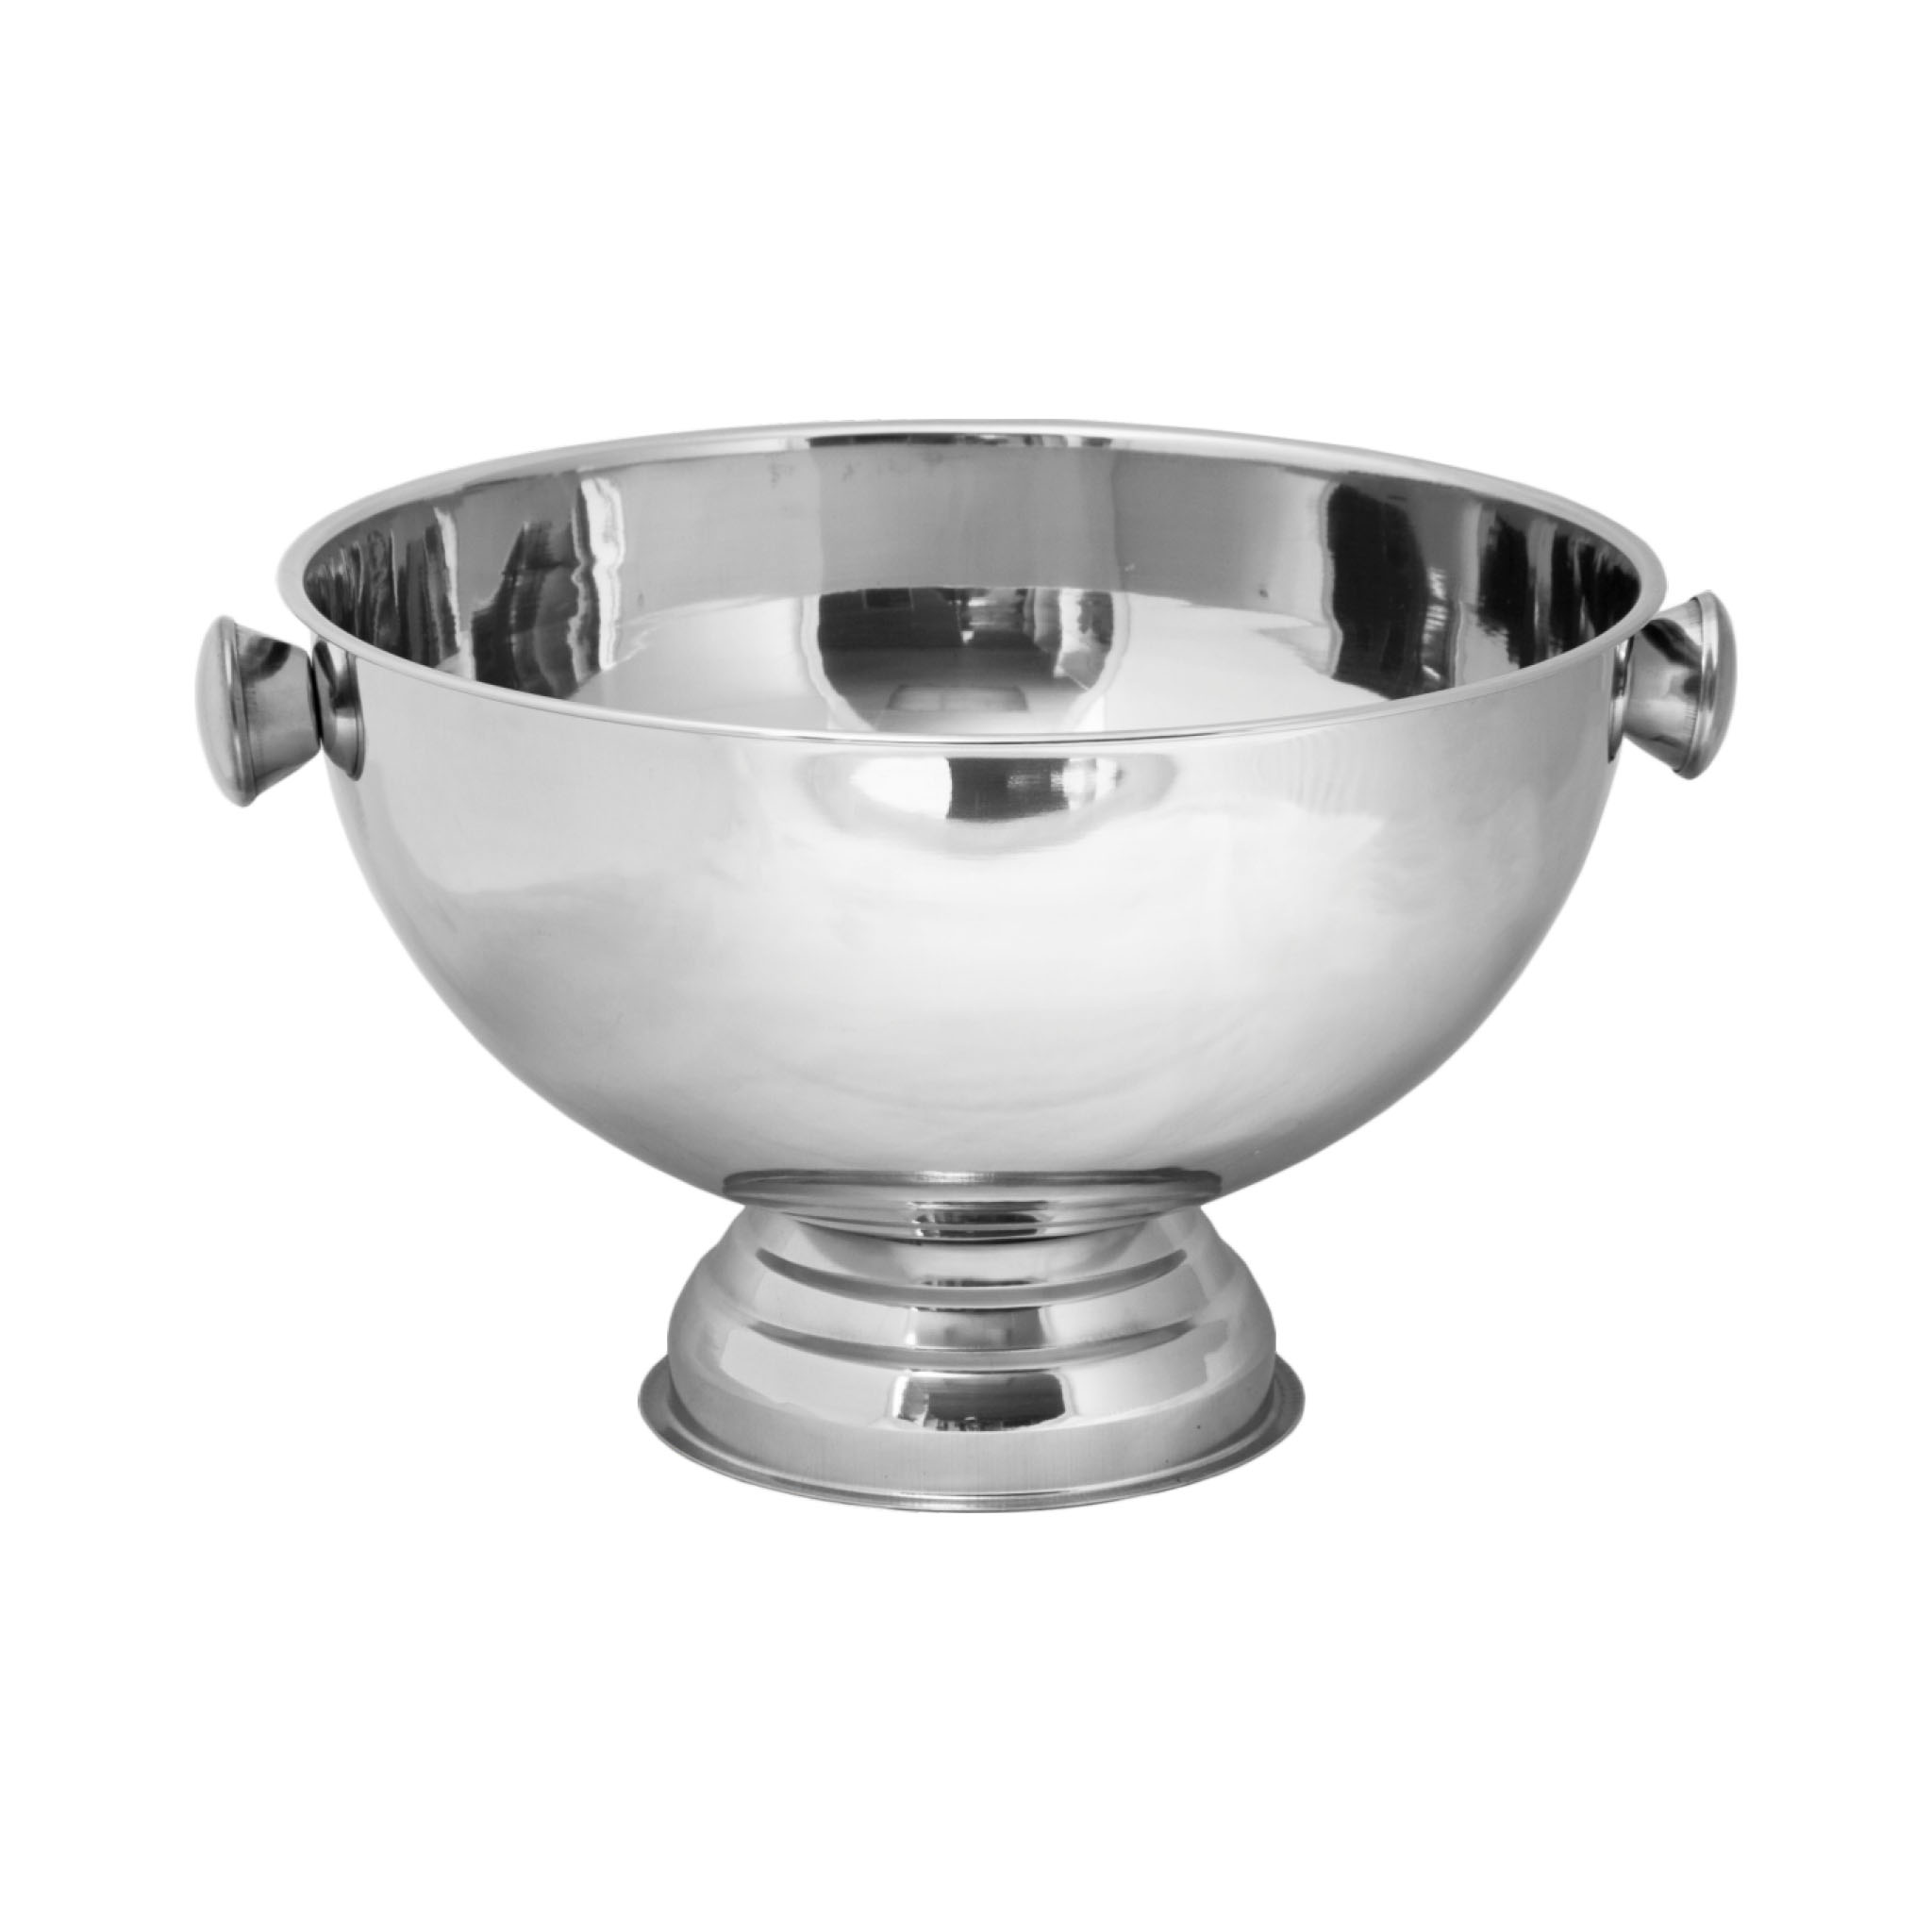 Bar Butler Champagne/Ice Bowl with Silver Knobs